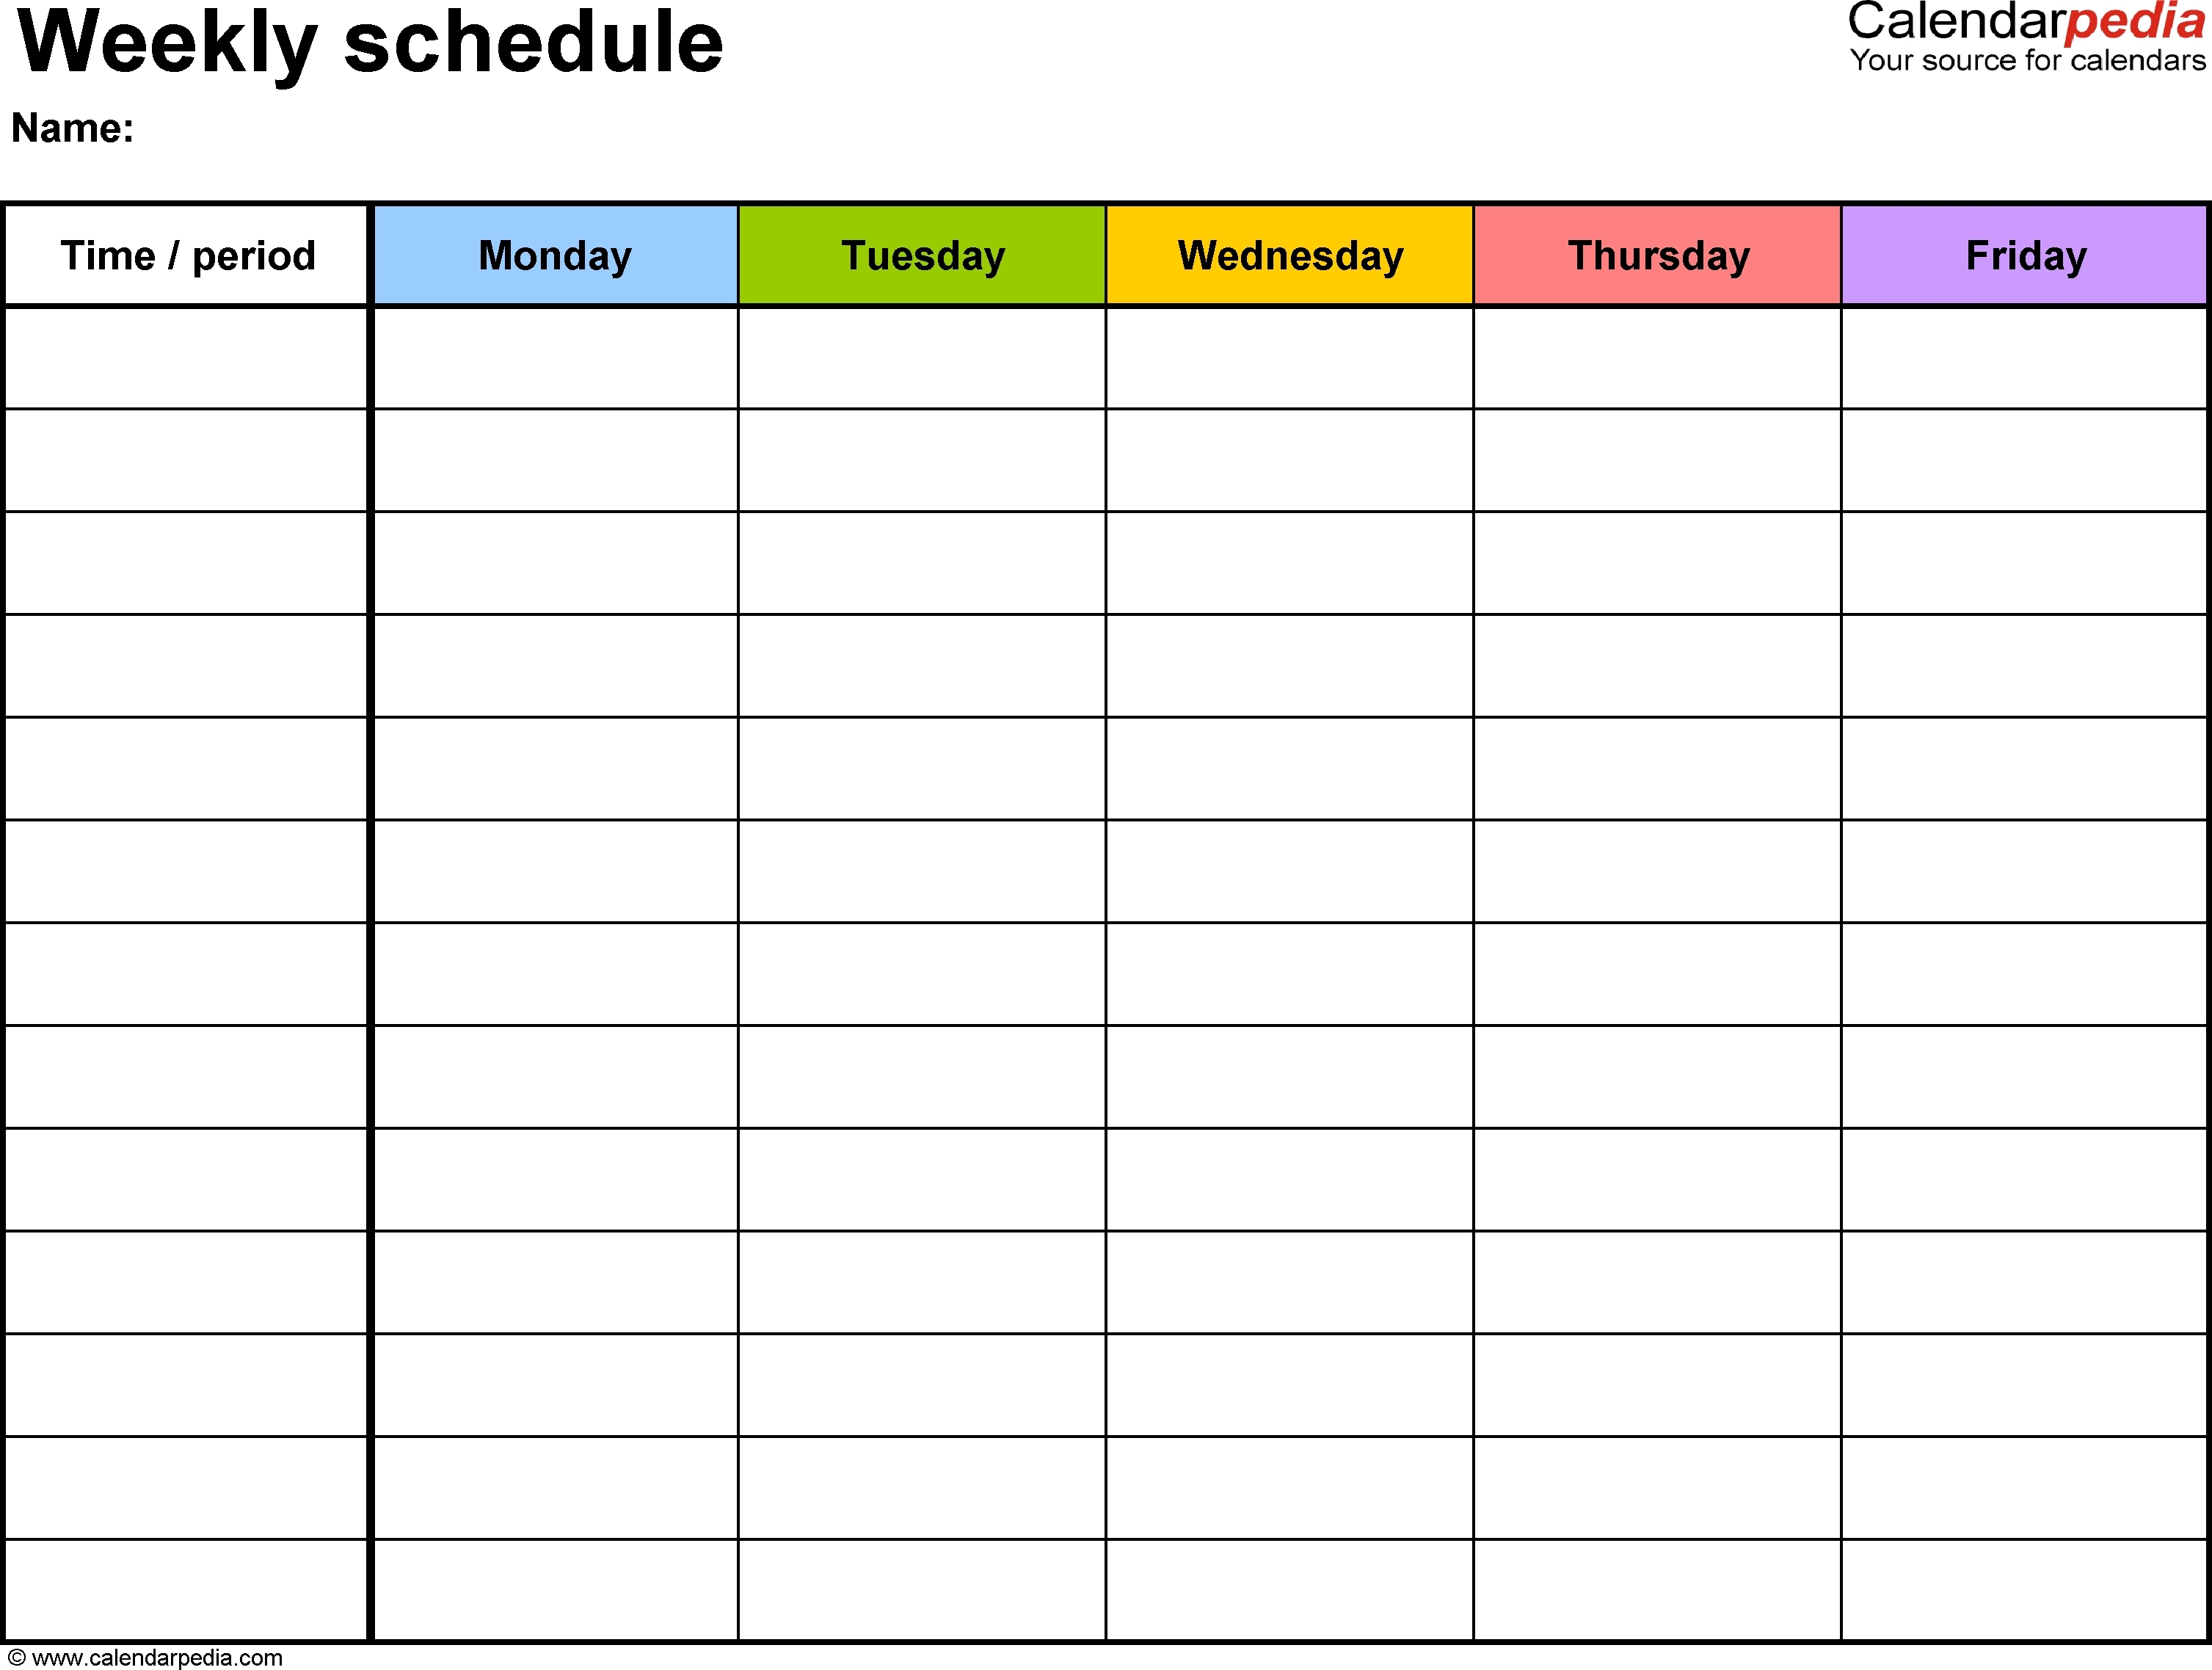 Daily Calendar With Time Slots  Neyar intended for Daily Planner With Time Slots Printable